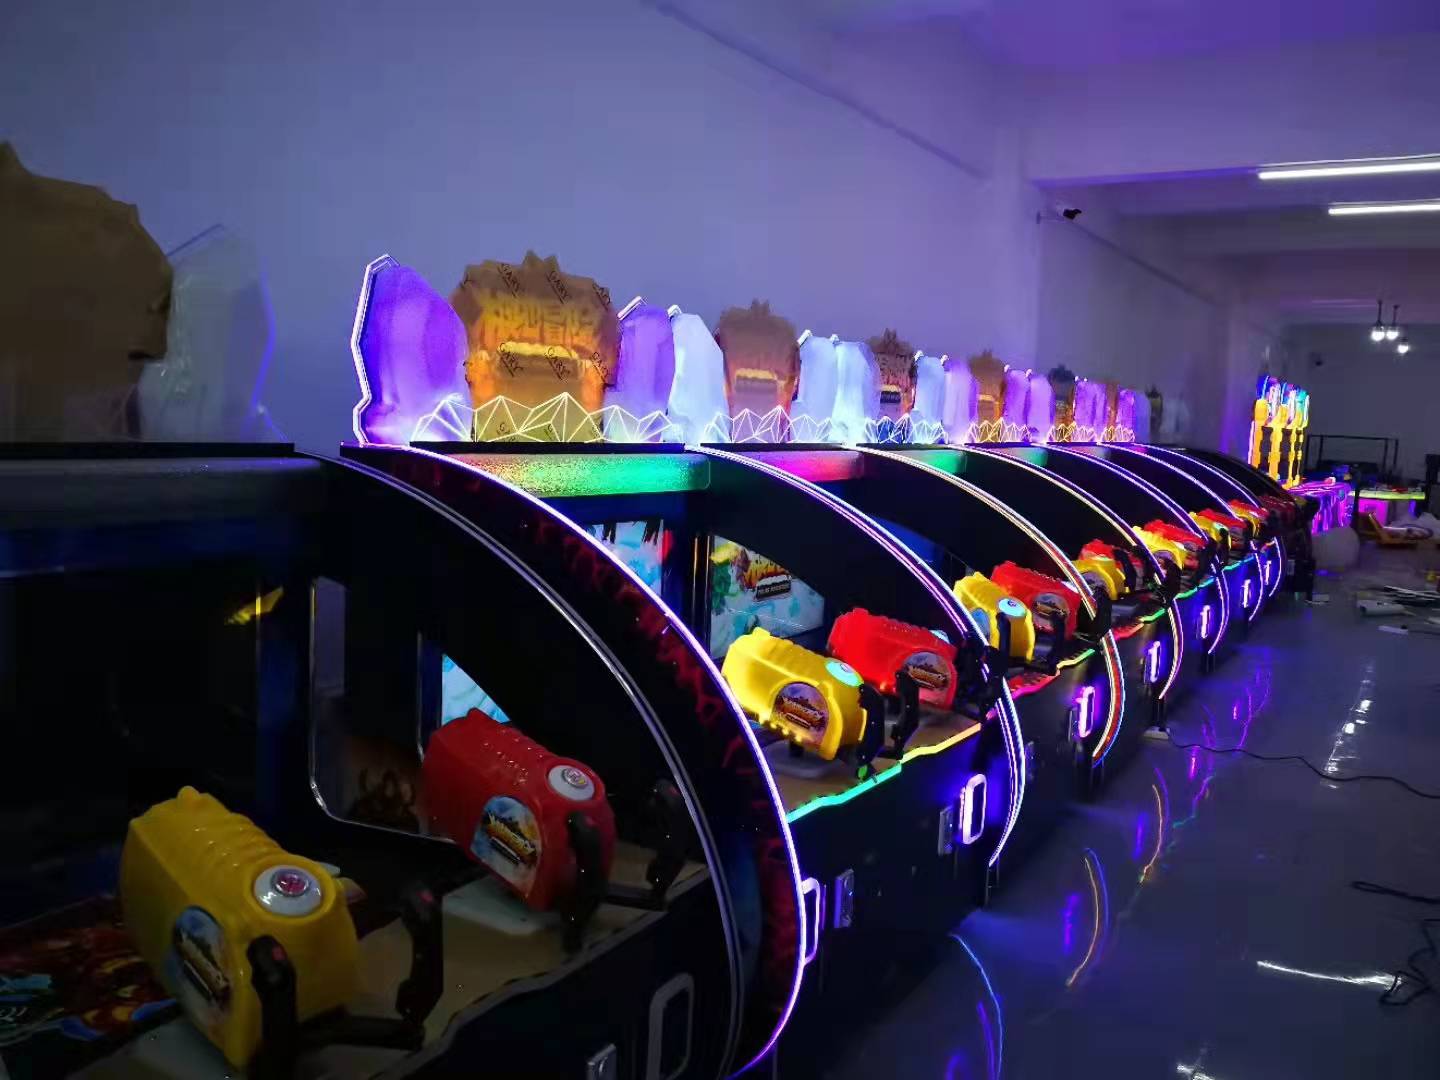 Polar-Adventure-Laser-shooting-game-machine-Newest-Indoor-Amusement-Coin-Operated-Lottery-Ticket-Redemption-games-for-kids-tomy-arcade-workshop-process